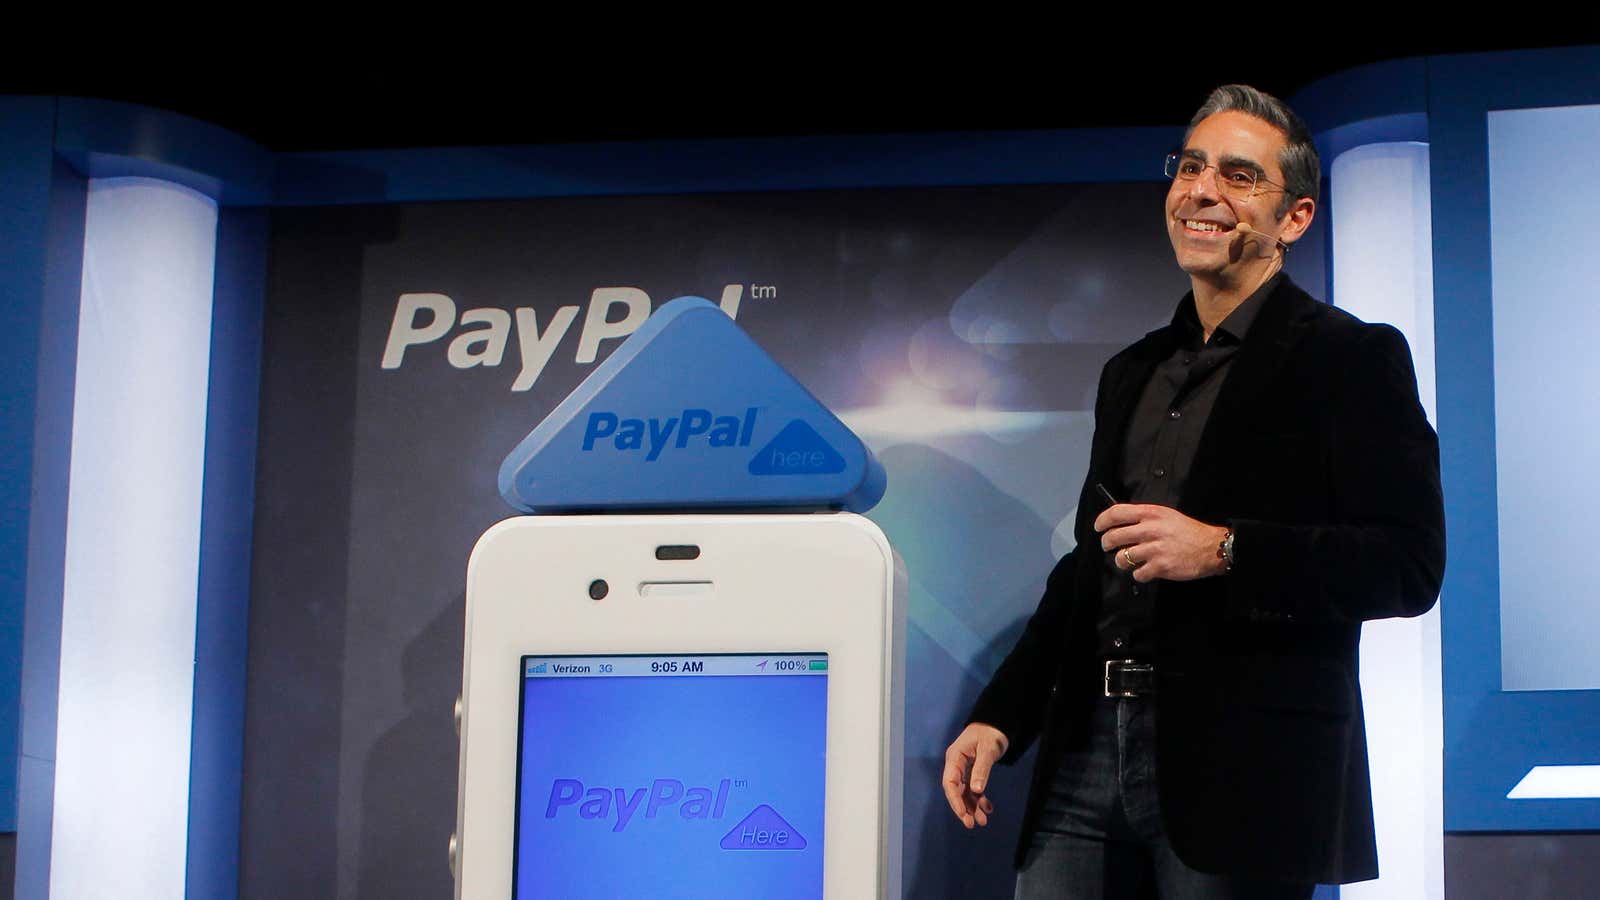 PayPal president David Marcus introducing PayPal’s competitor to Square, PayPal Here.